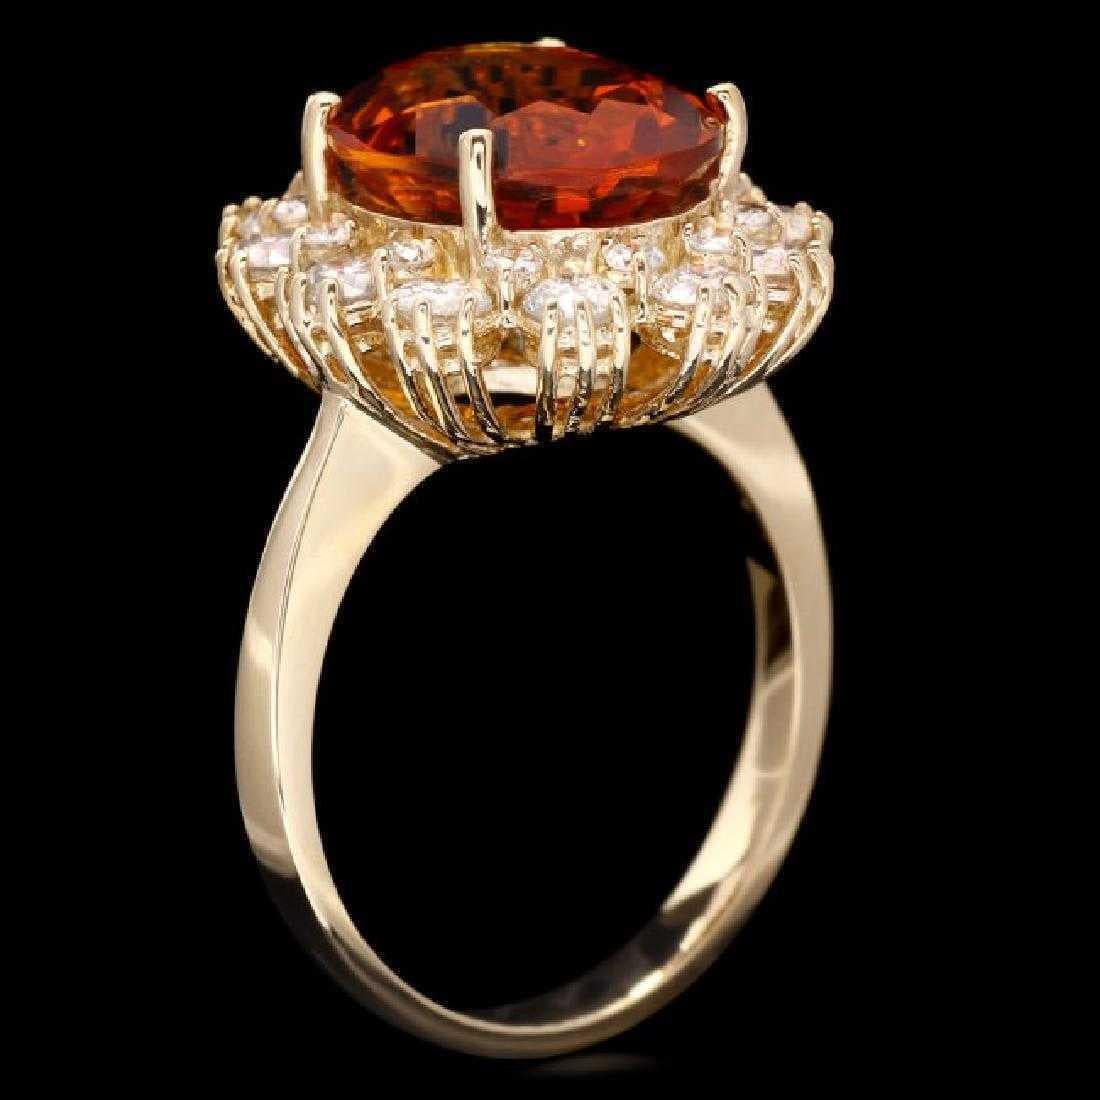 5.90 Carats Exquisite Natural Madeira Citrine and Diamond 14K Solid Yellow Gold Ring

Total Natural Citrine Weights: 4.60 Carats

Citrine Measures: 12 x 10mm

Natural Round Diamonds Weight: 1.30 Carats (color G-H / Clarity Si1-SI2)

Ring size: 7 (we